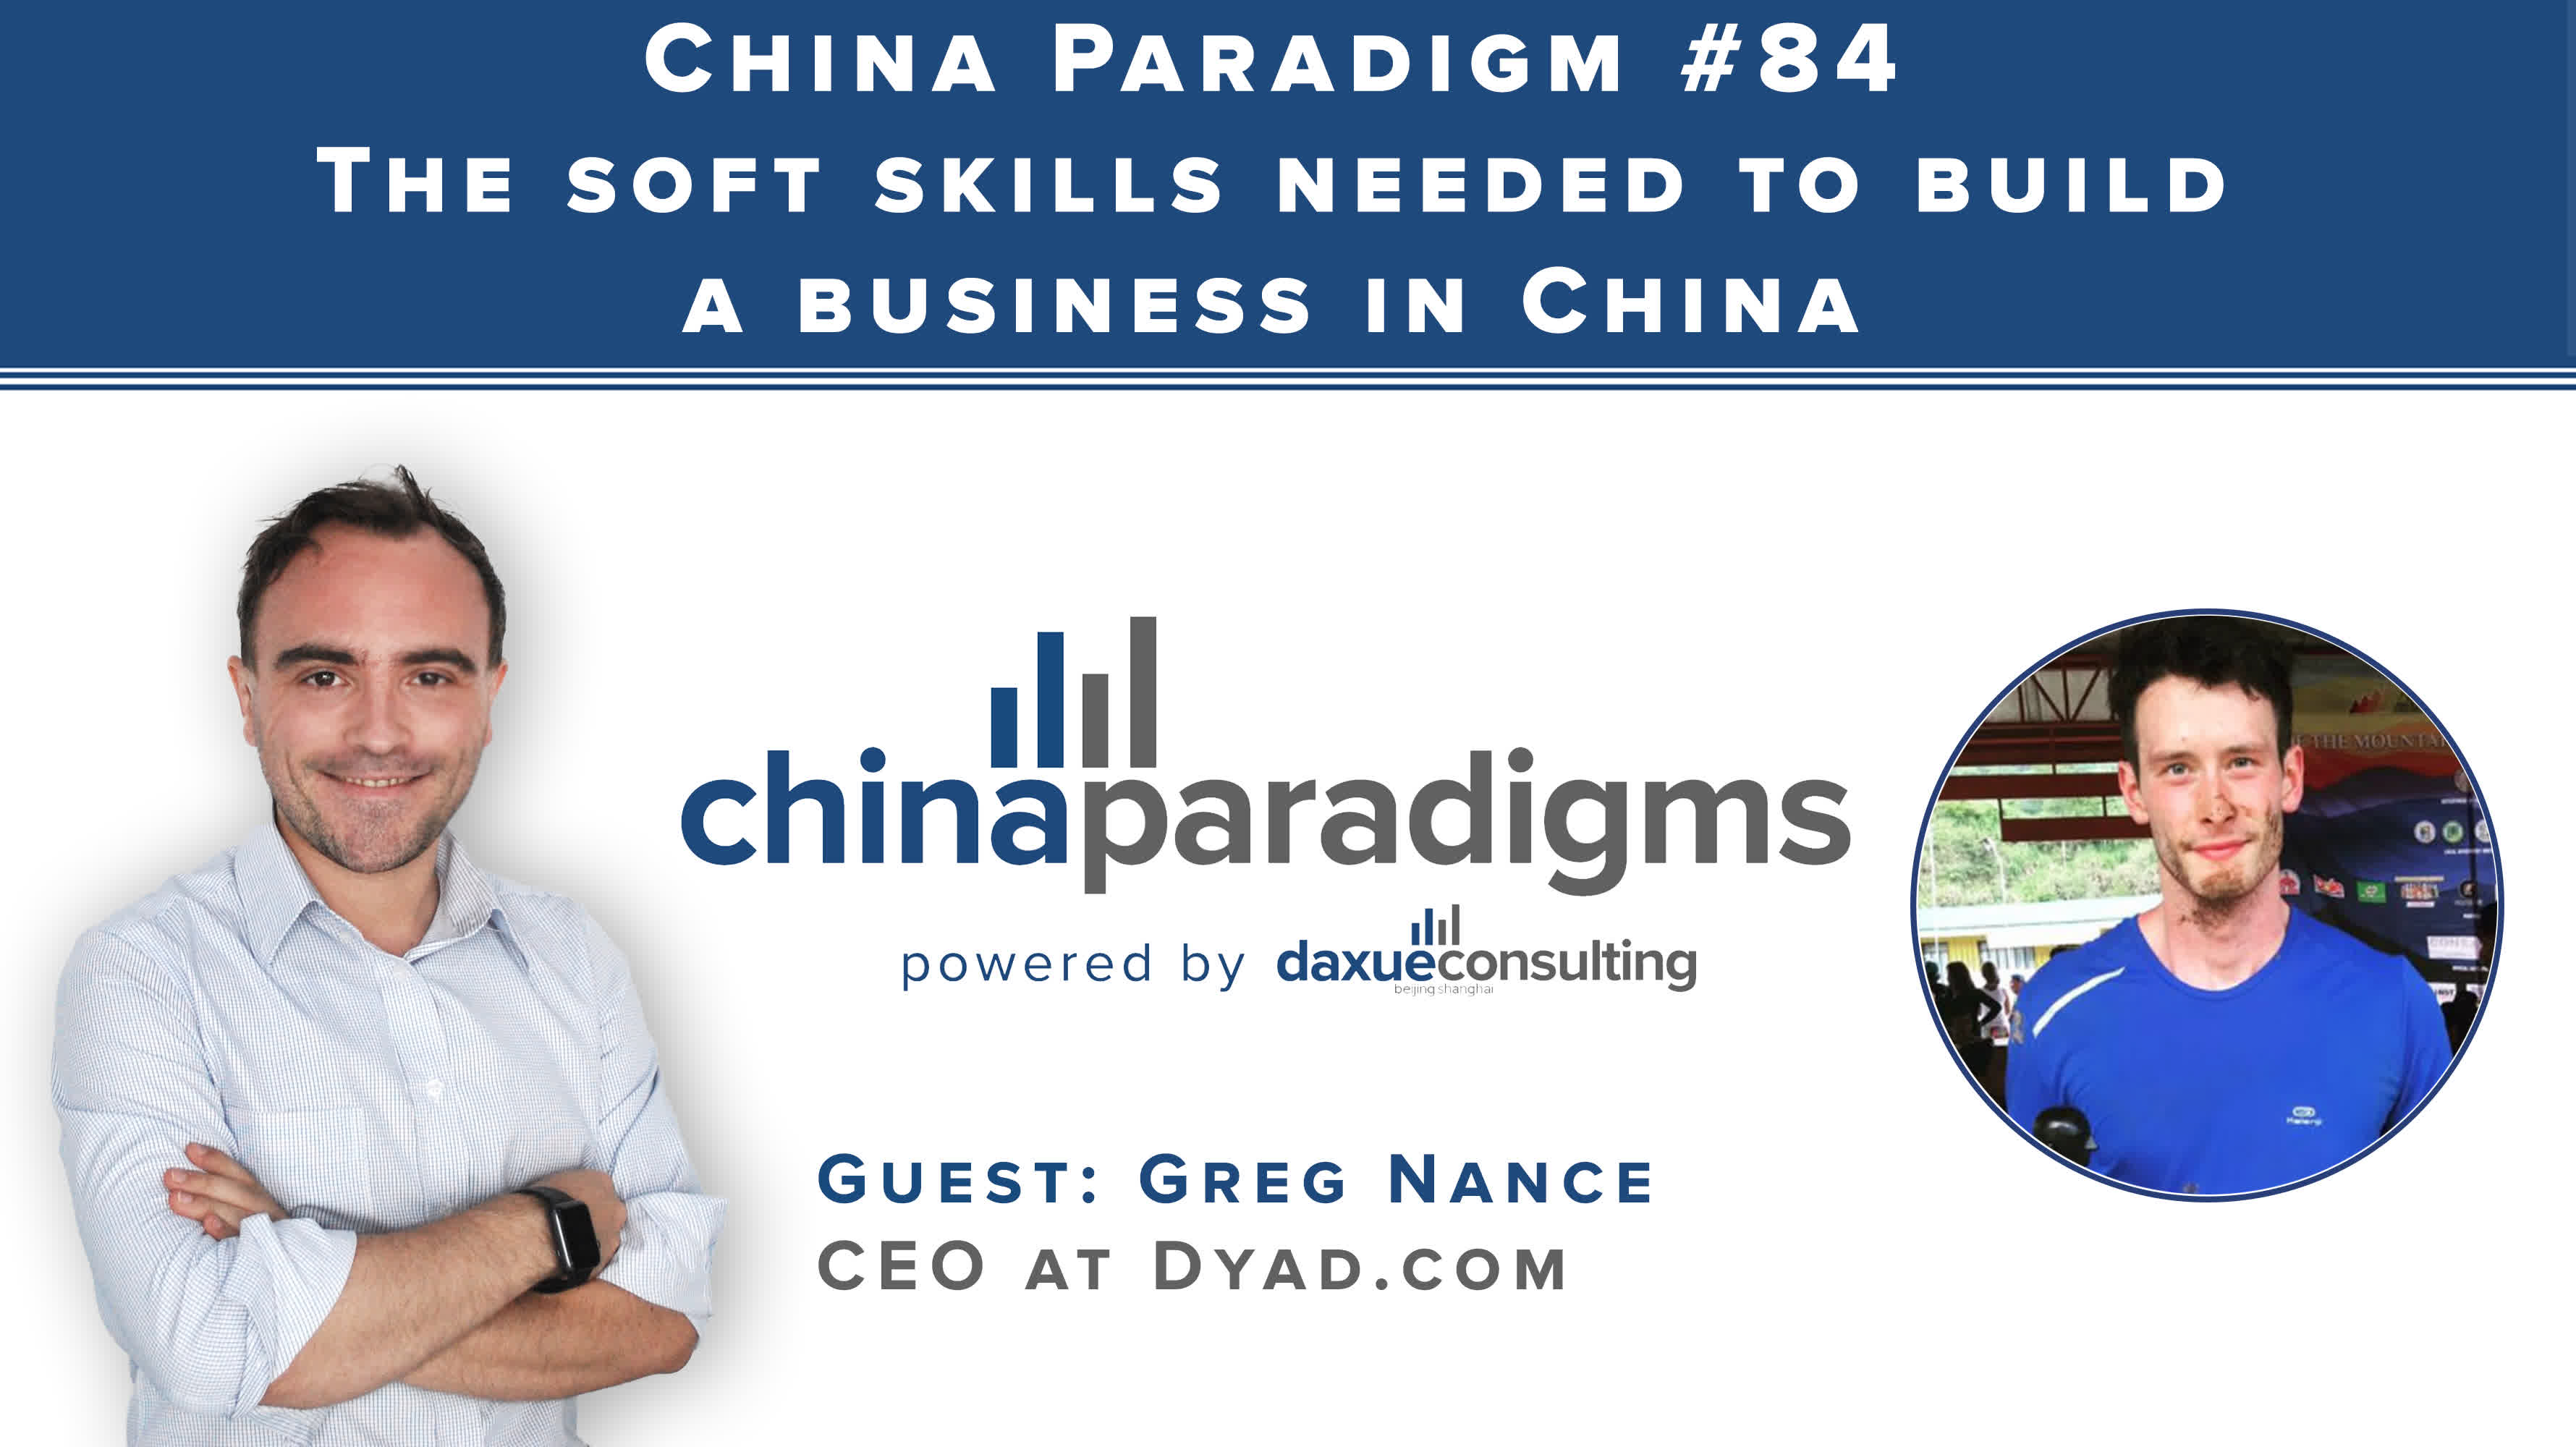 China Paradigm 84: The soft skills needed to build a business in China